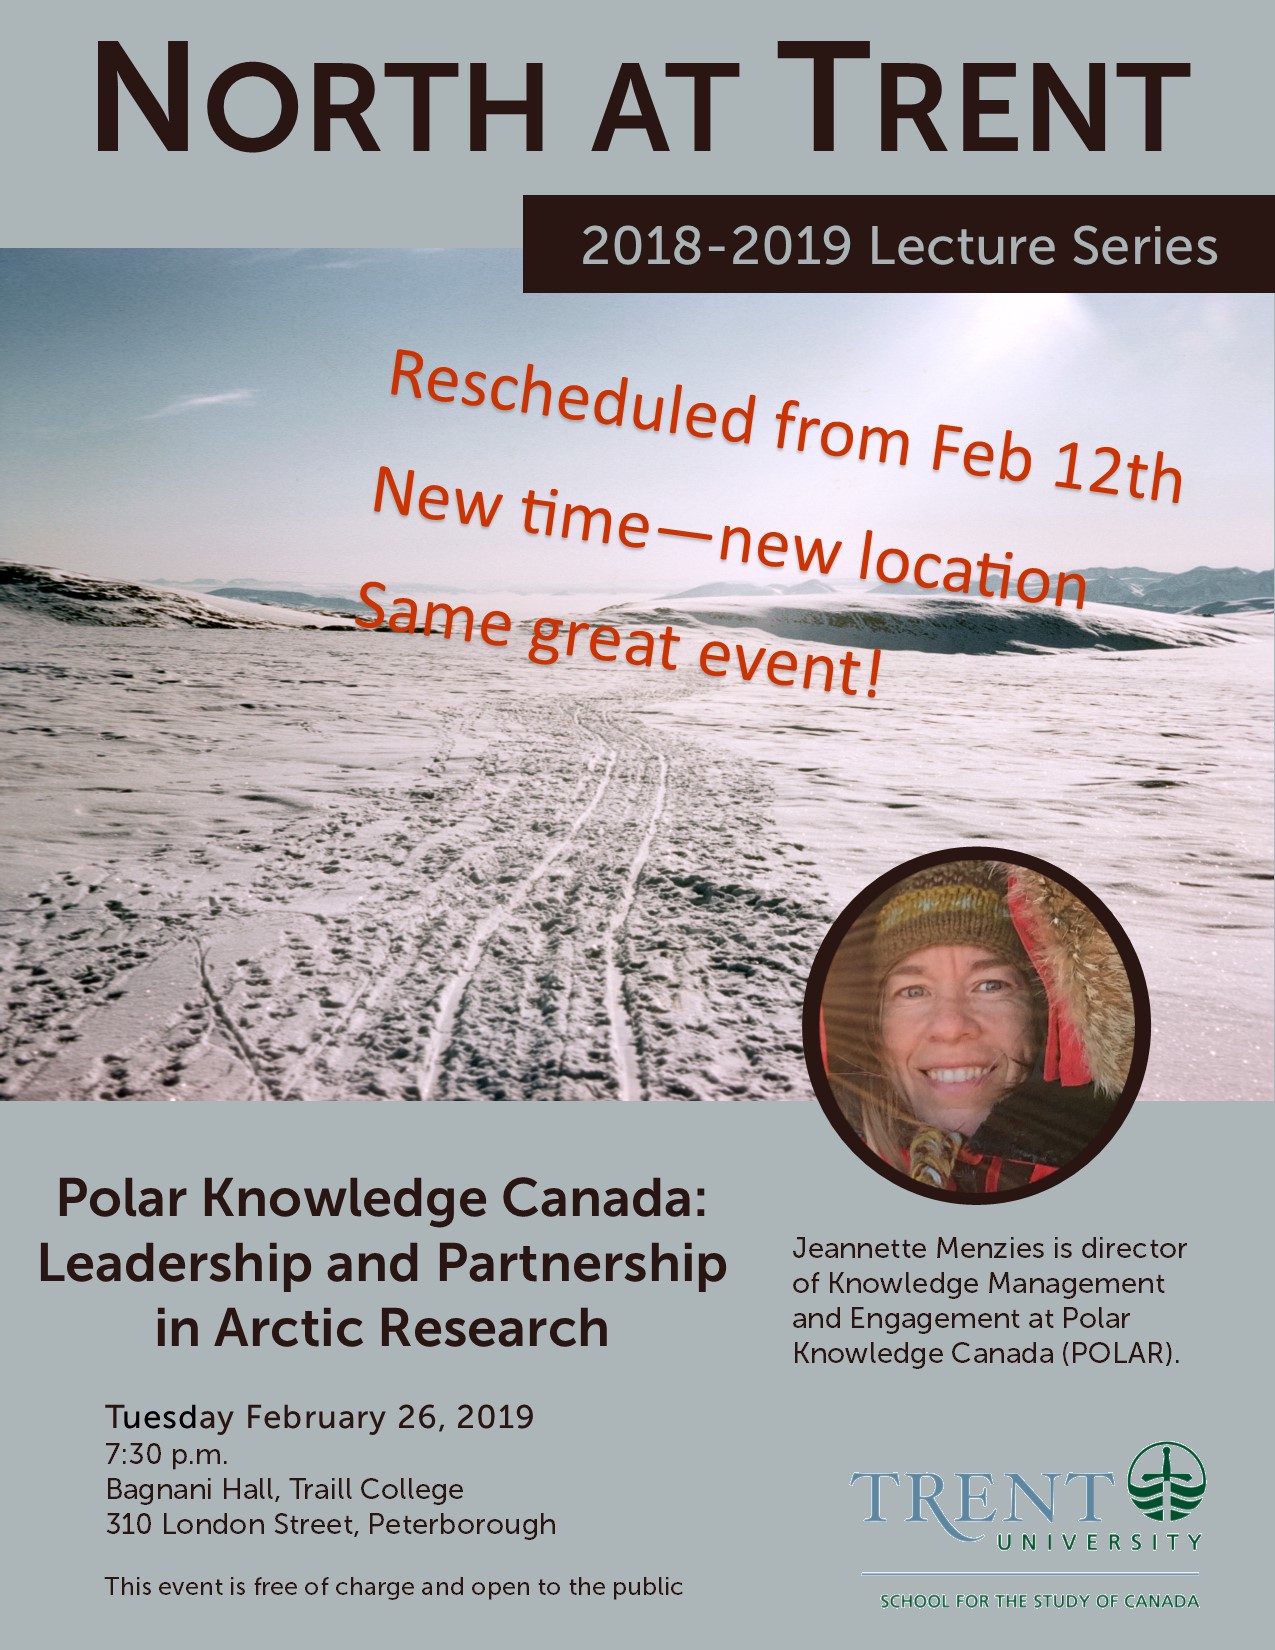 "Polar Knowledge Canada: Leadership & Partnership in Arctic Research" February 2019 with Jeannette Menzies